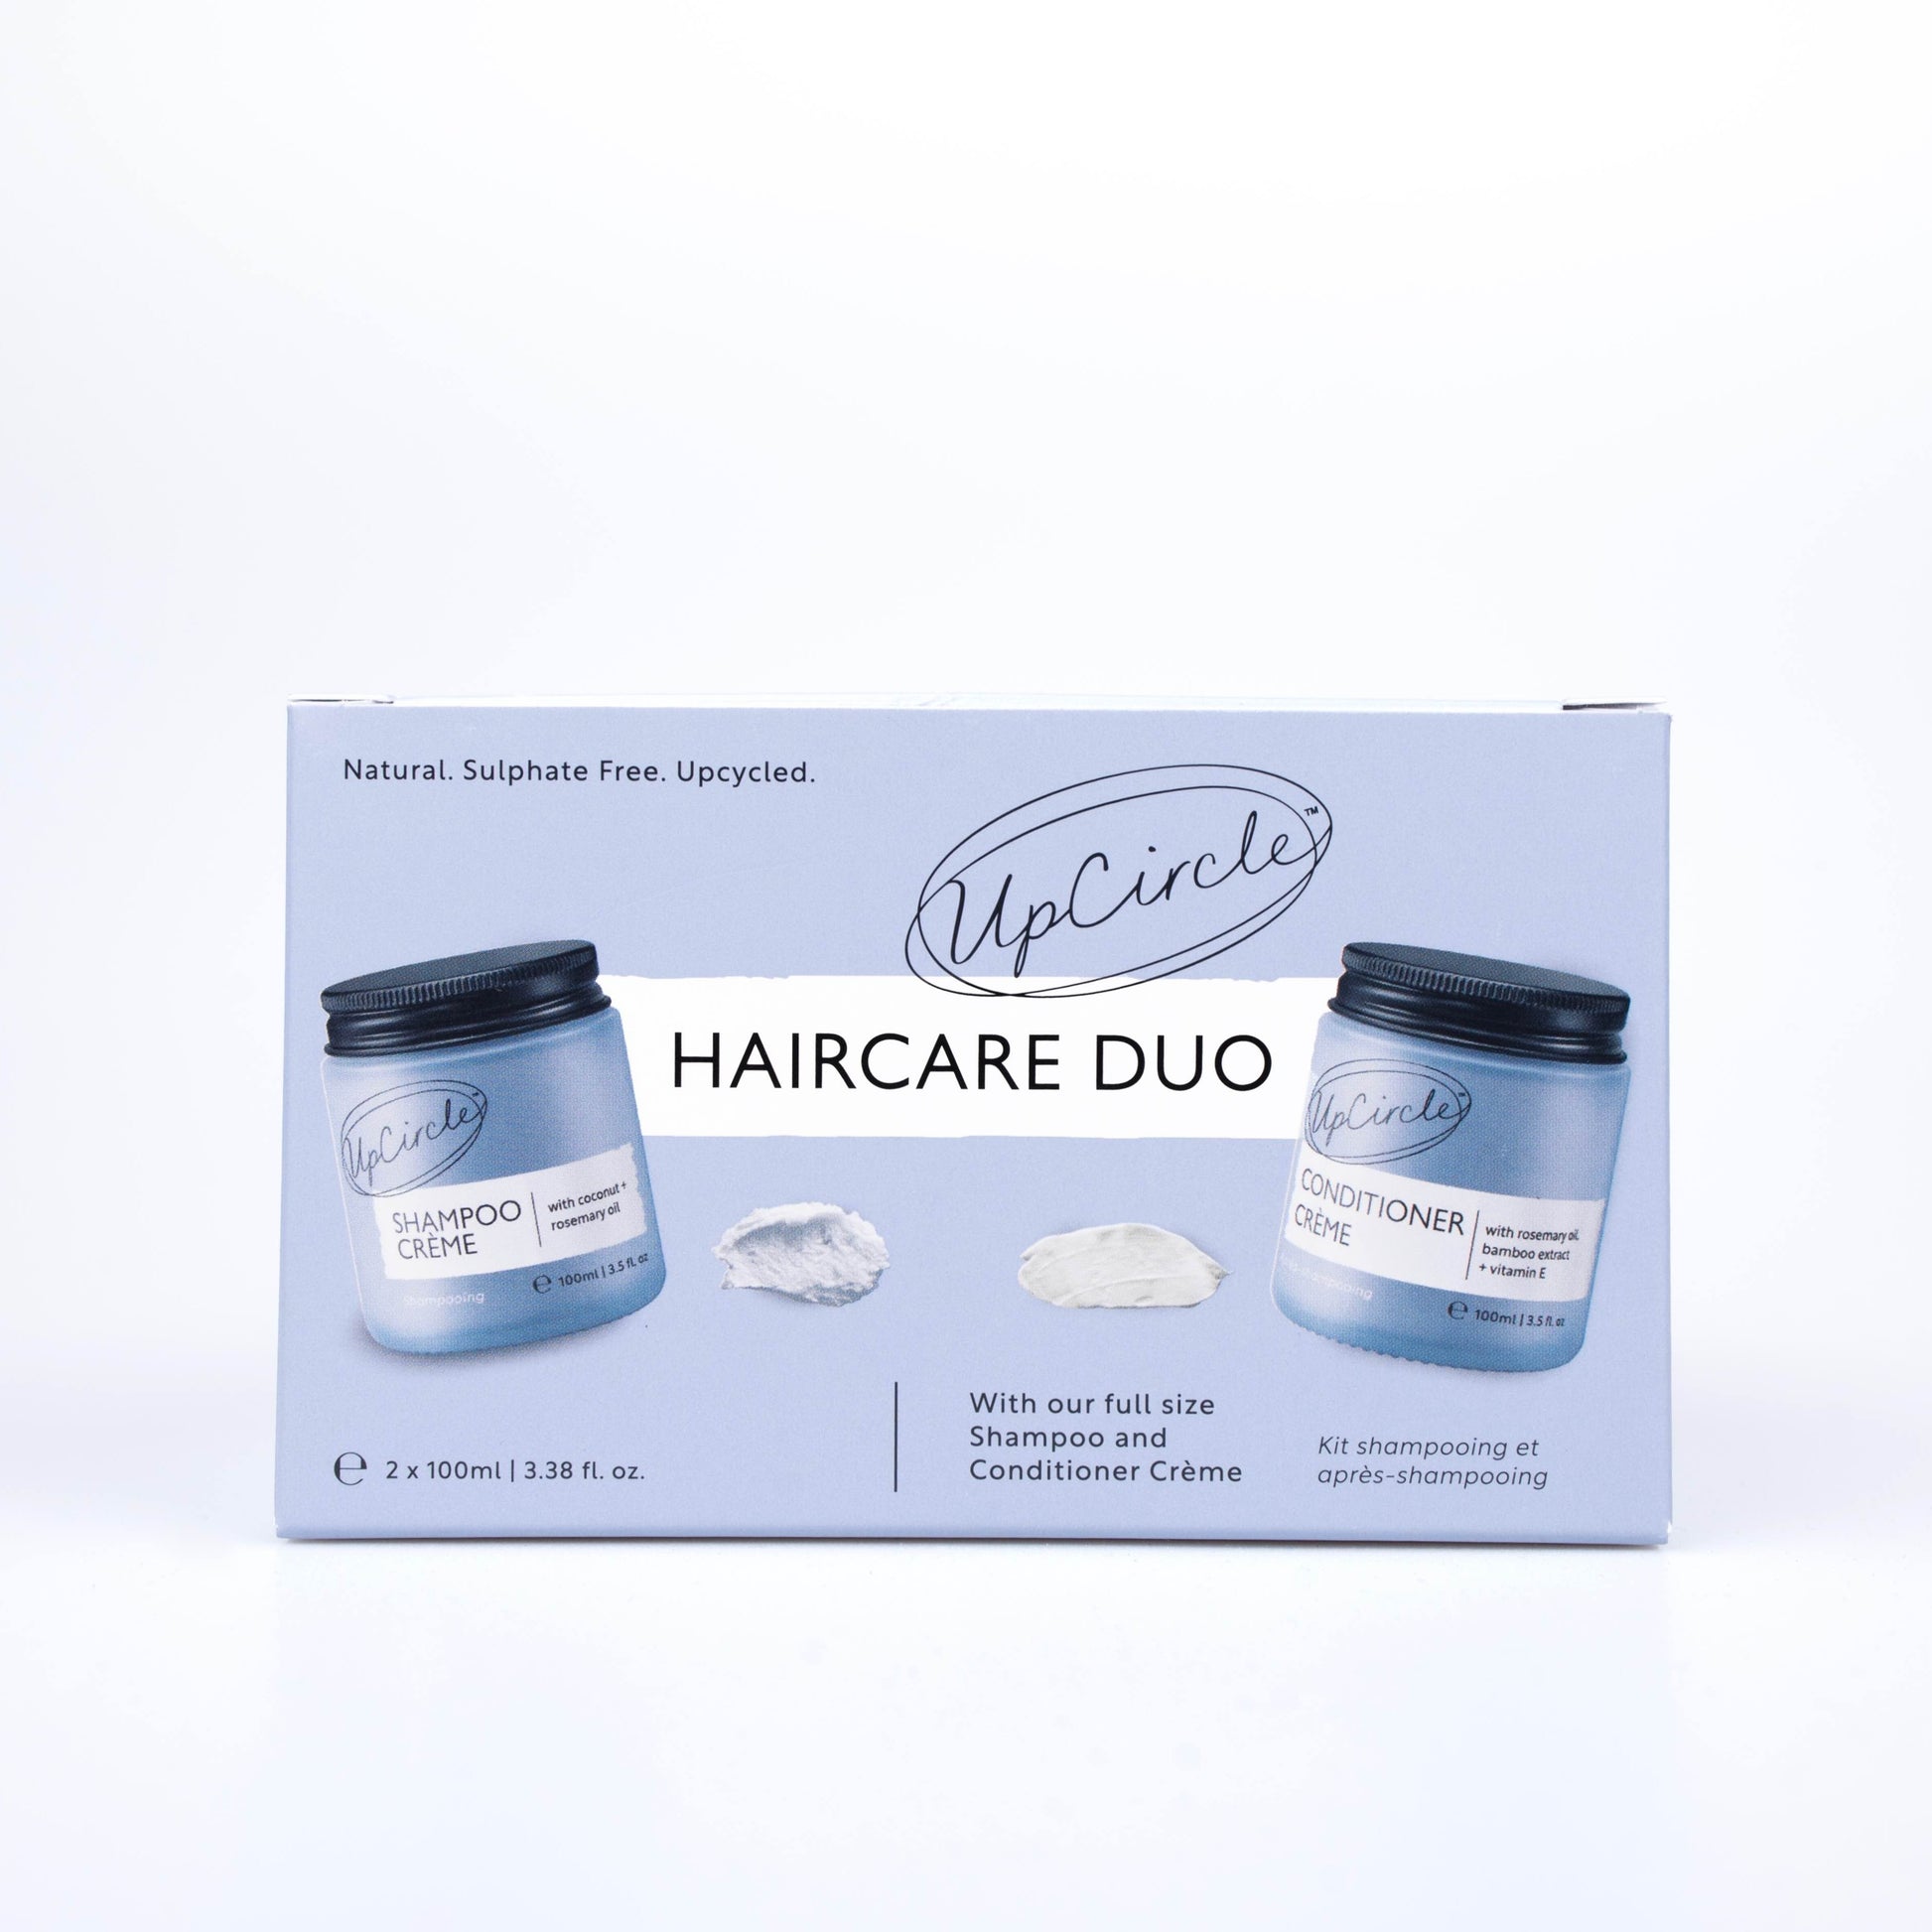 upcircle hair care duo. Photo of the blue cardboard box on a white background